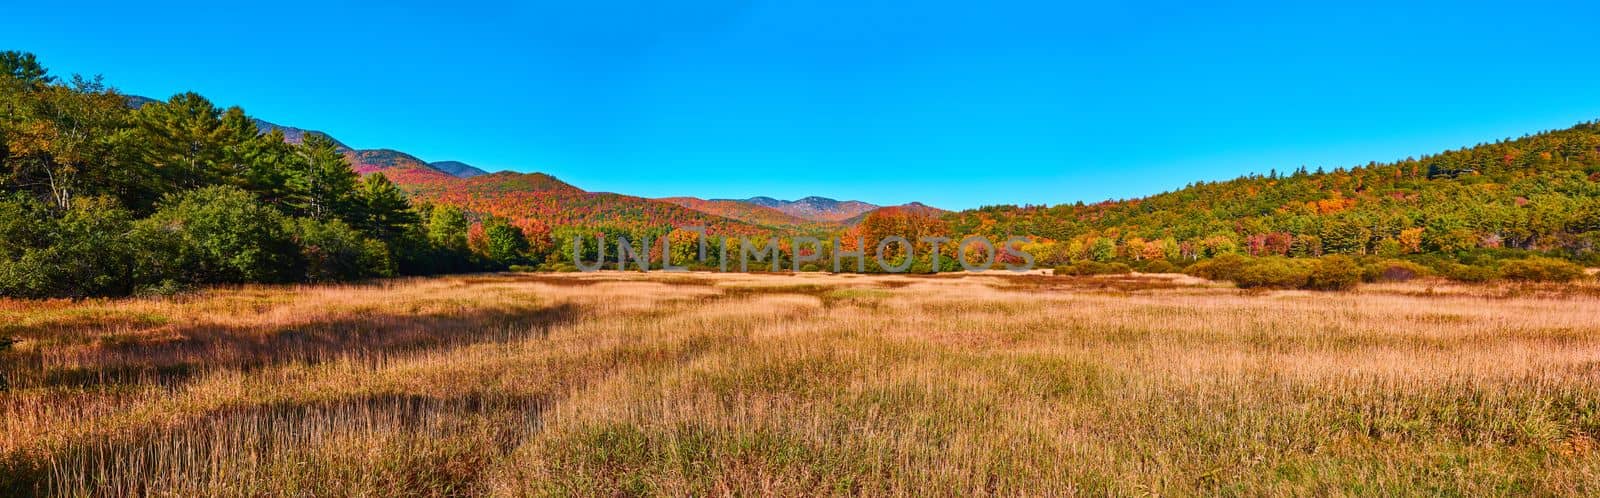 Panorama of golden fields and peak fall mountains in New York by njproductions